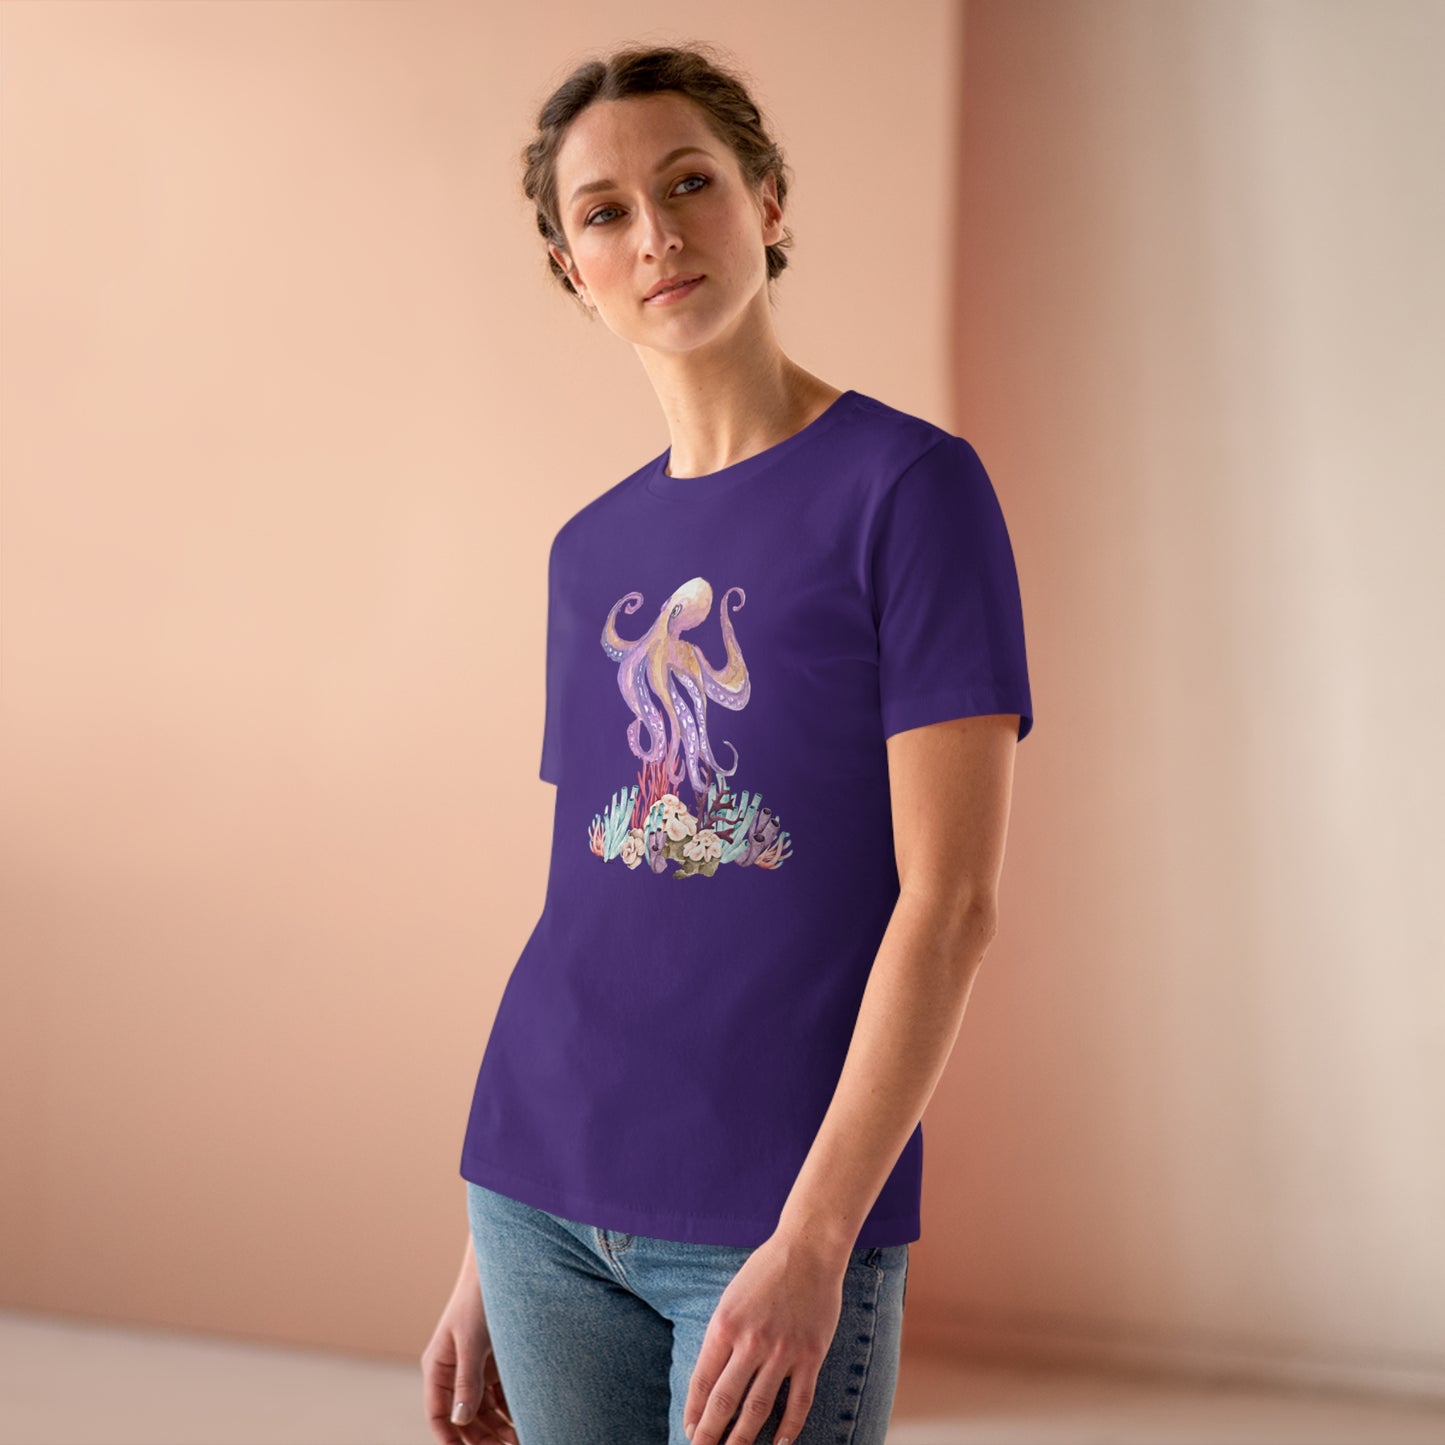 Mock up of a woman wearing the Purple t-shirt